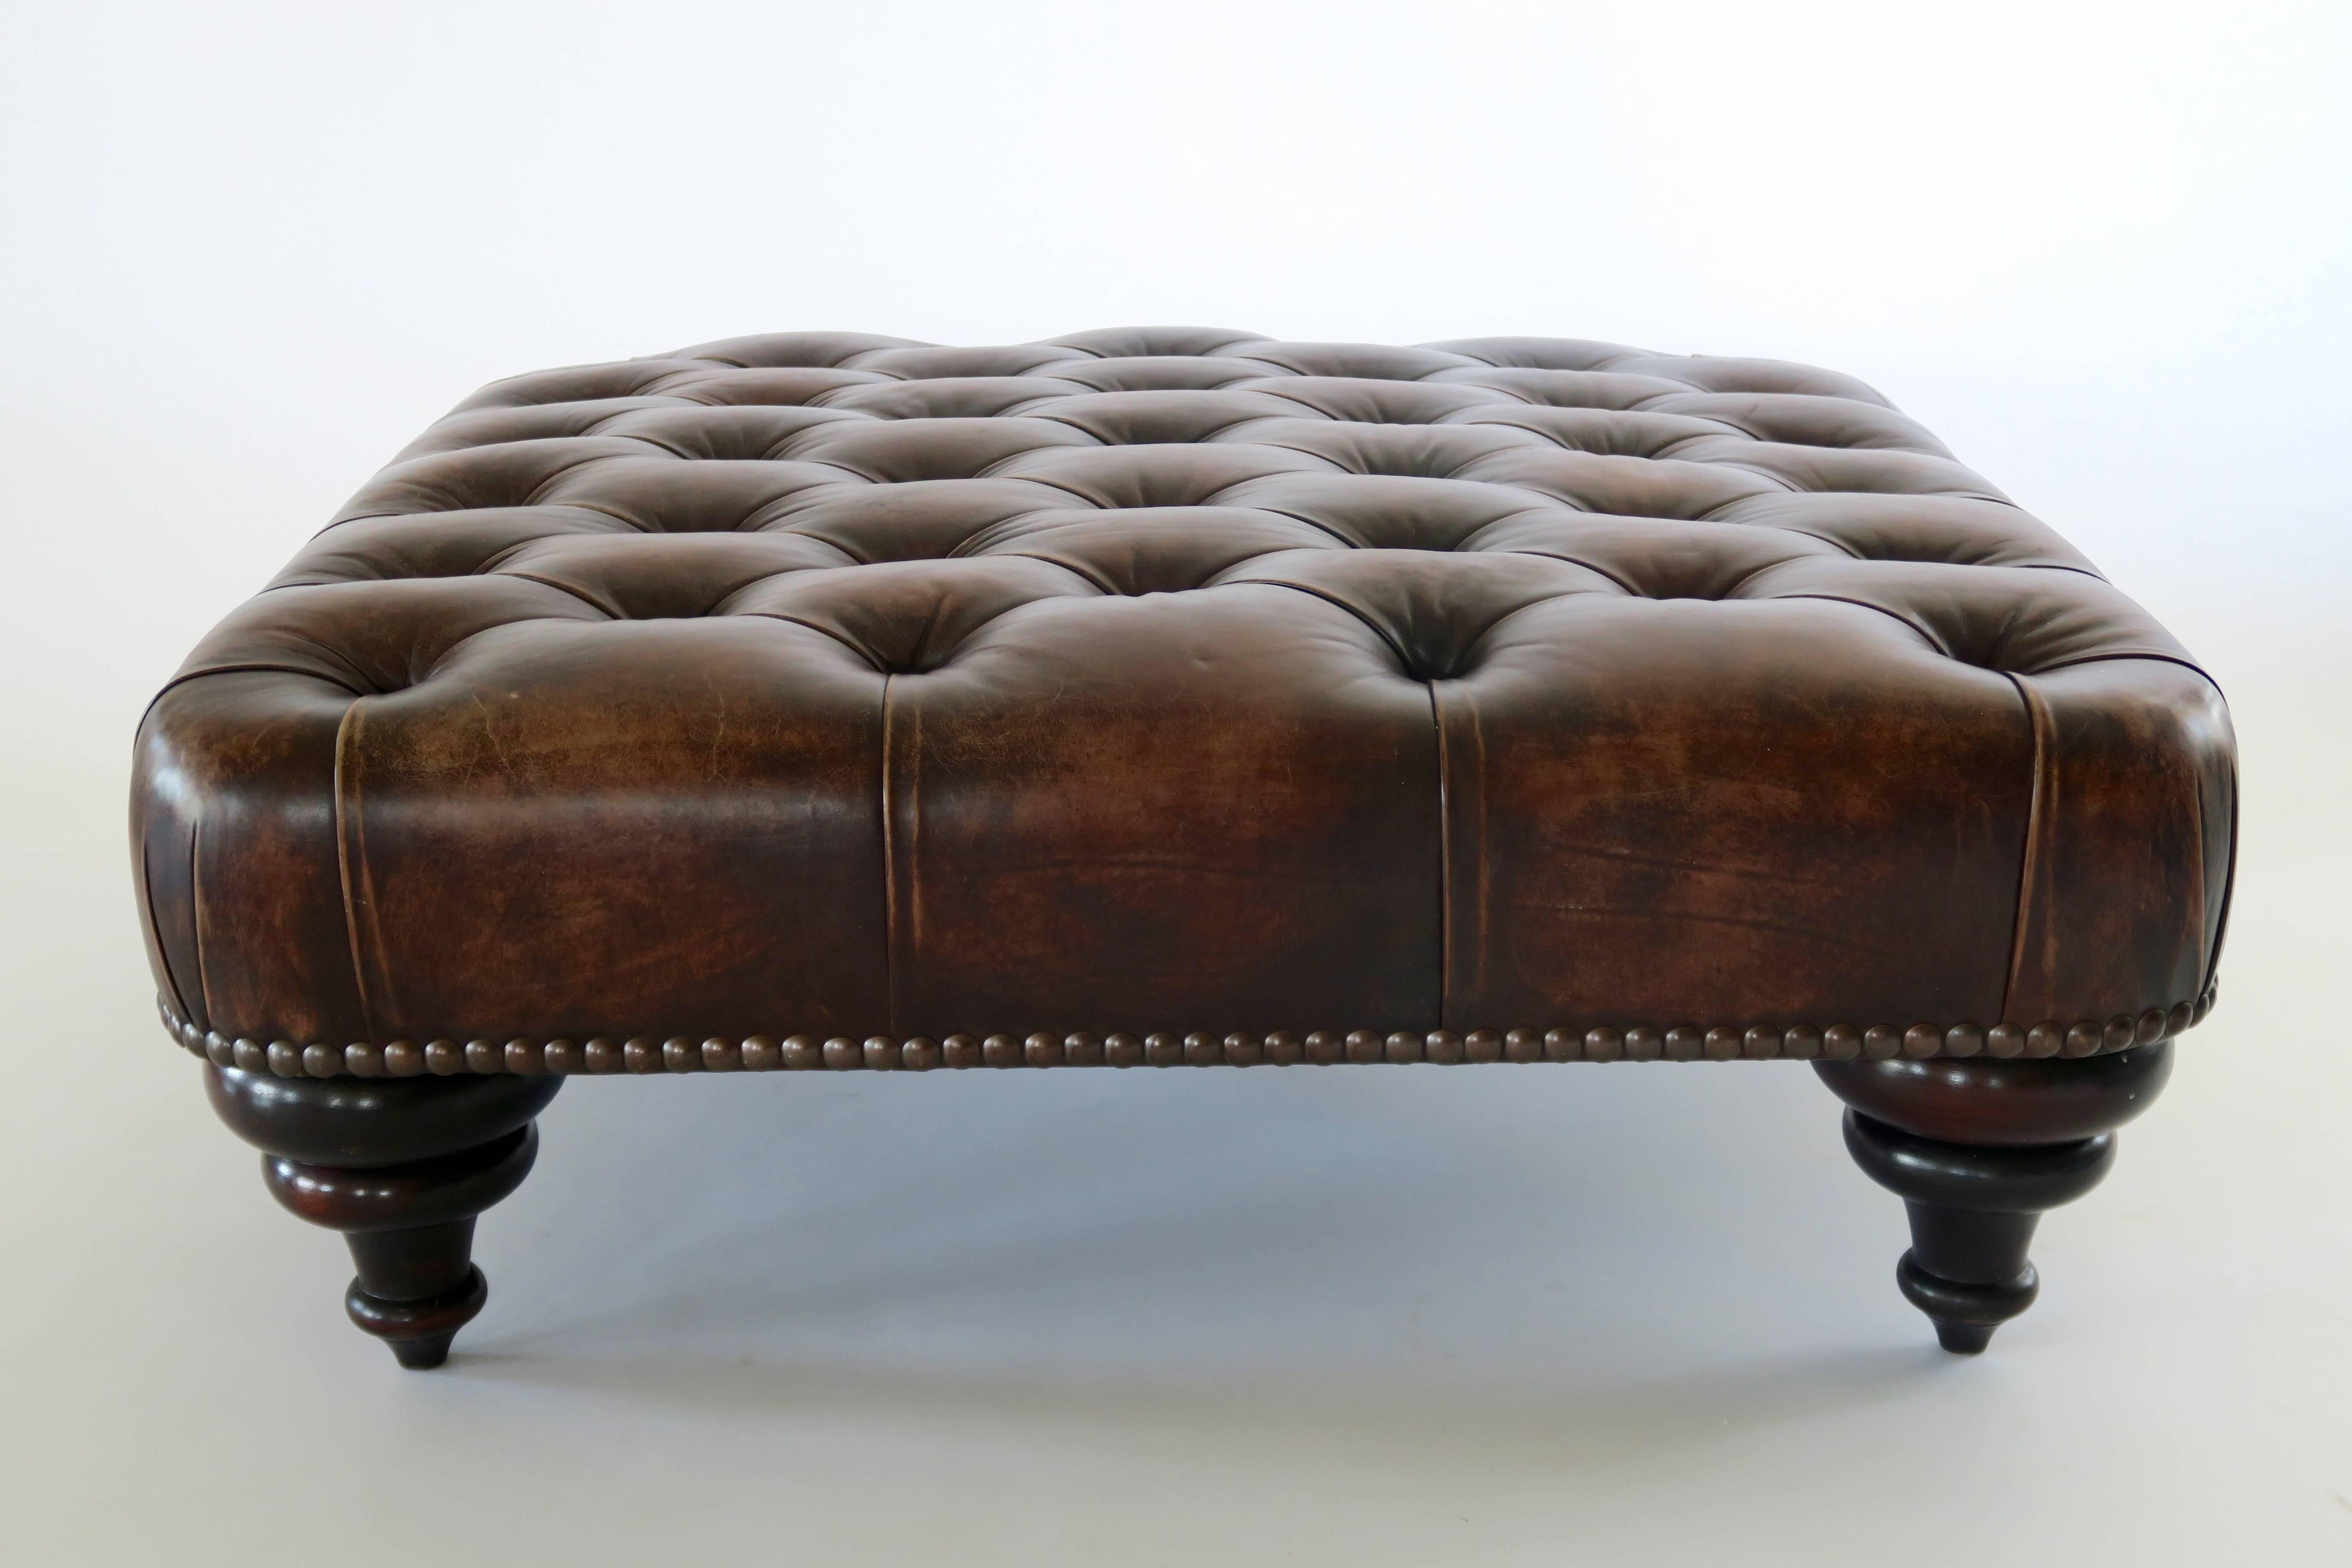 Ottoman by Georges Smith.